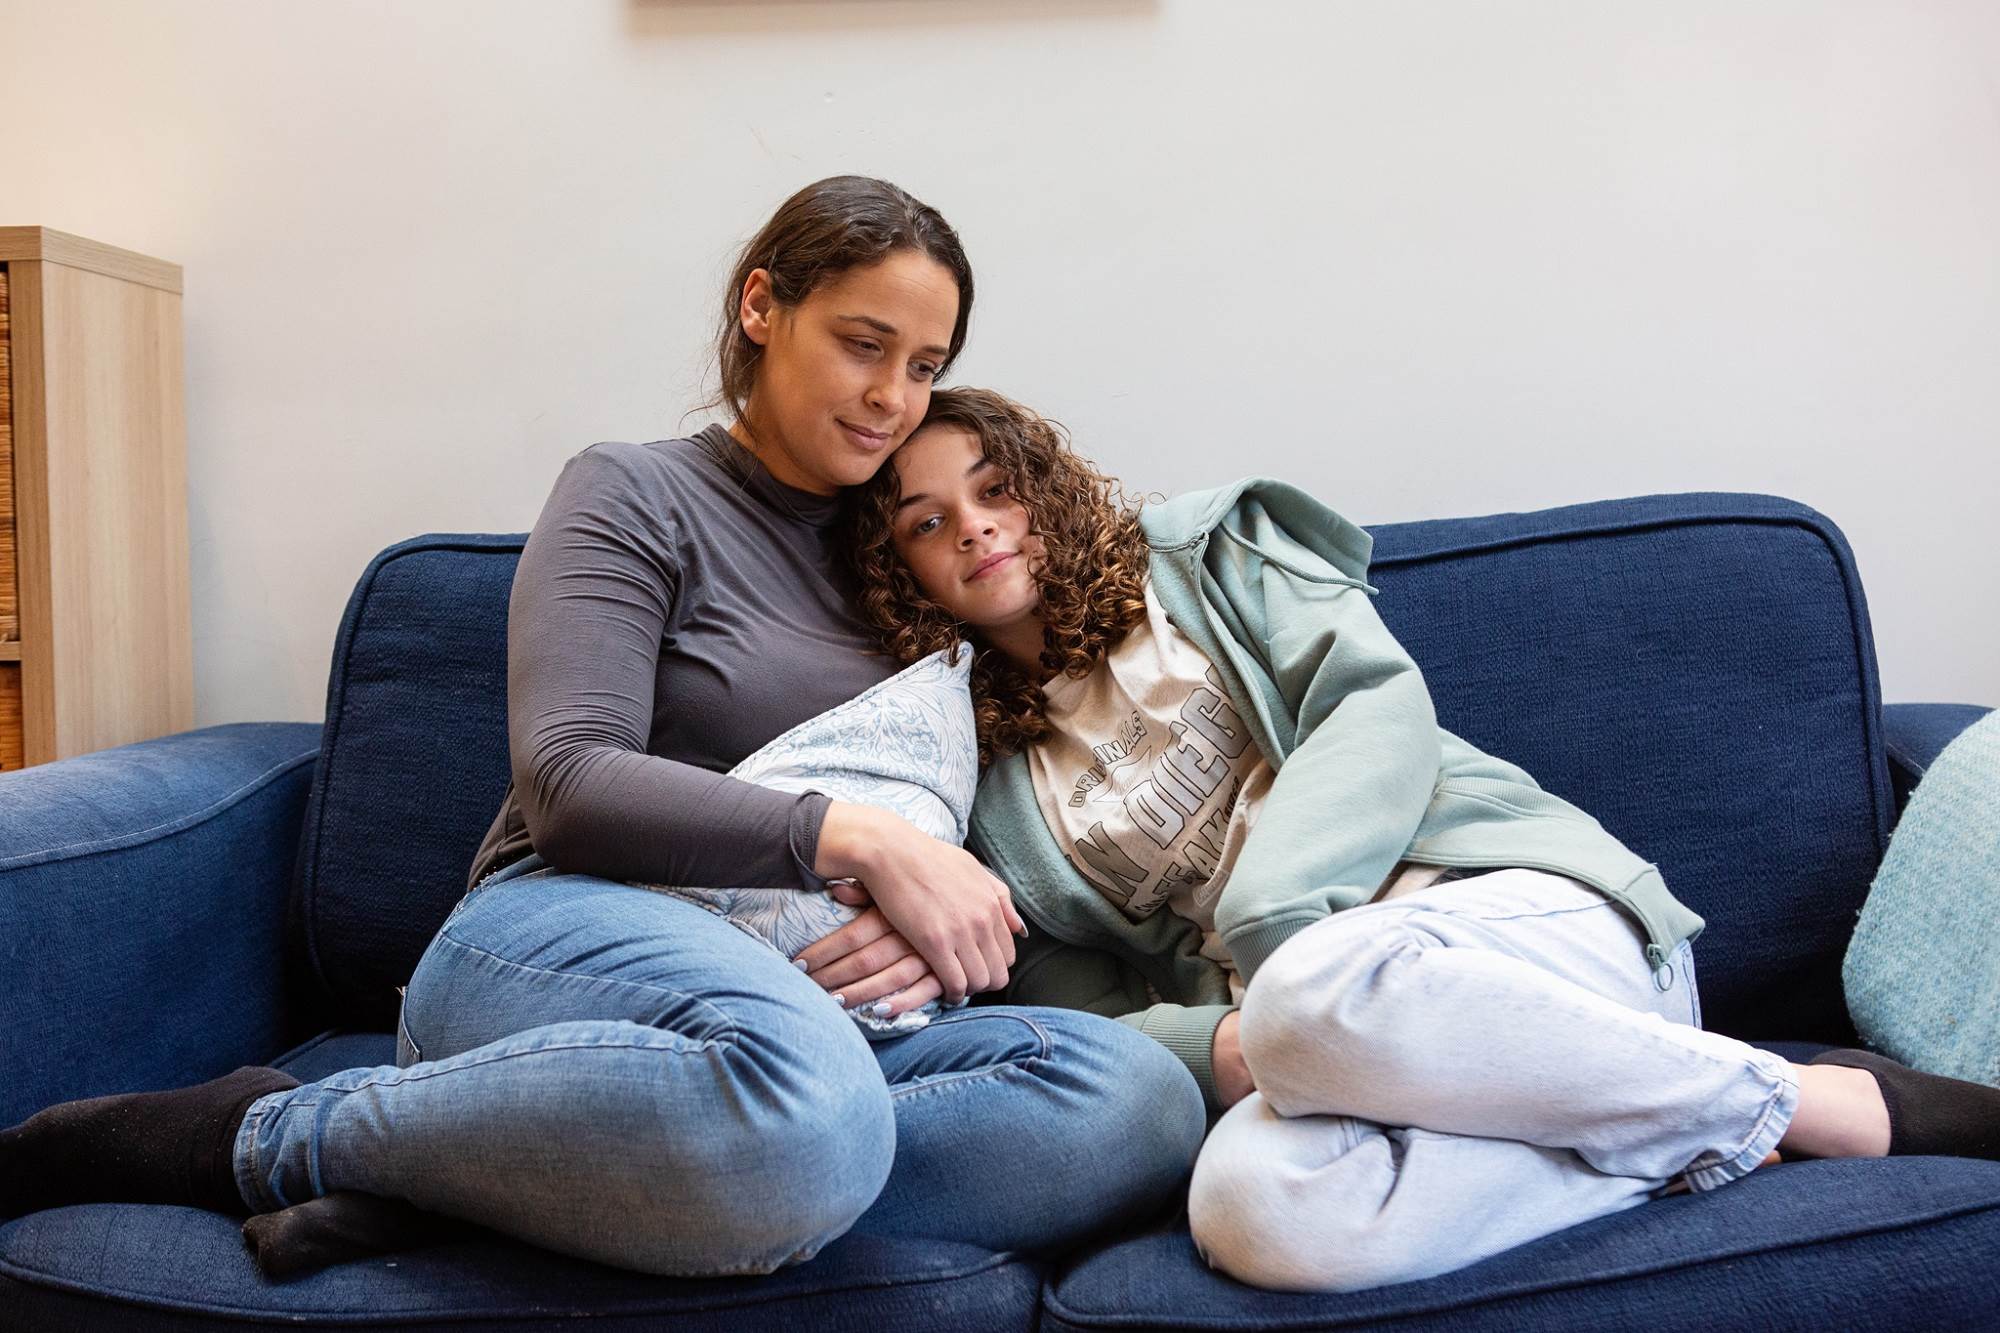 Teen Girl Cuddles Up To Woman On Sofa Smiling